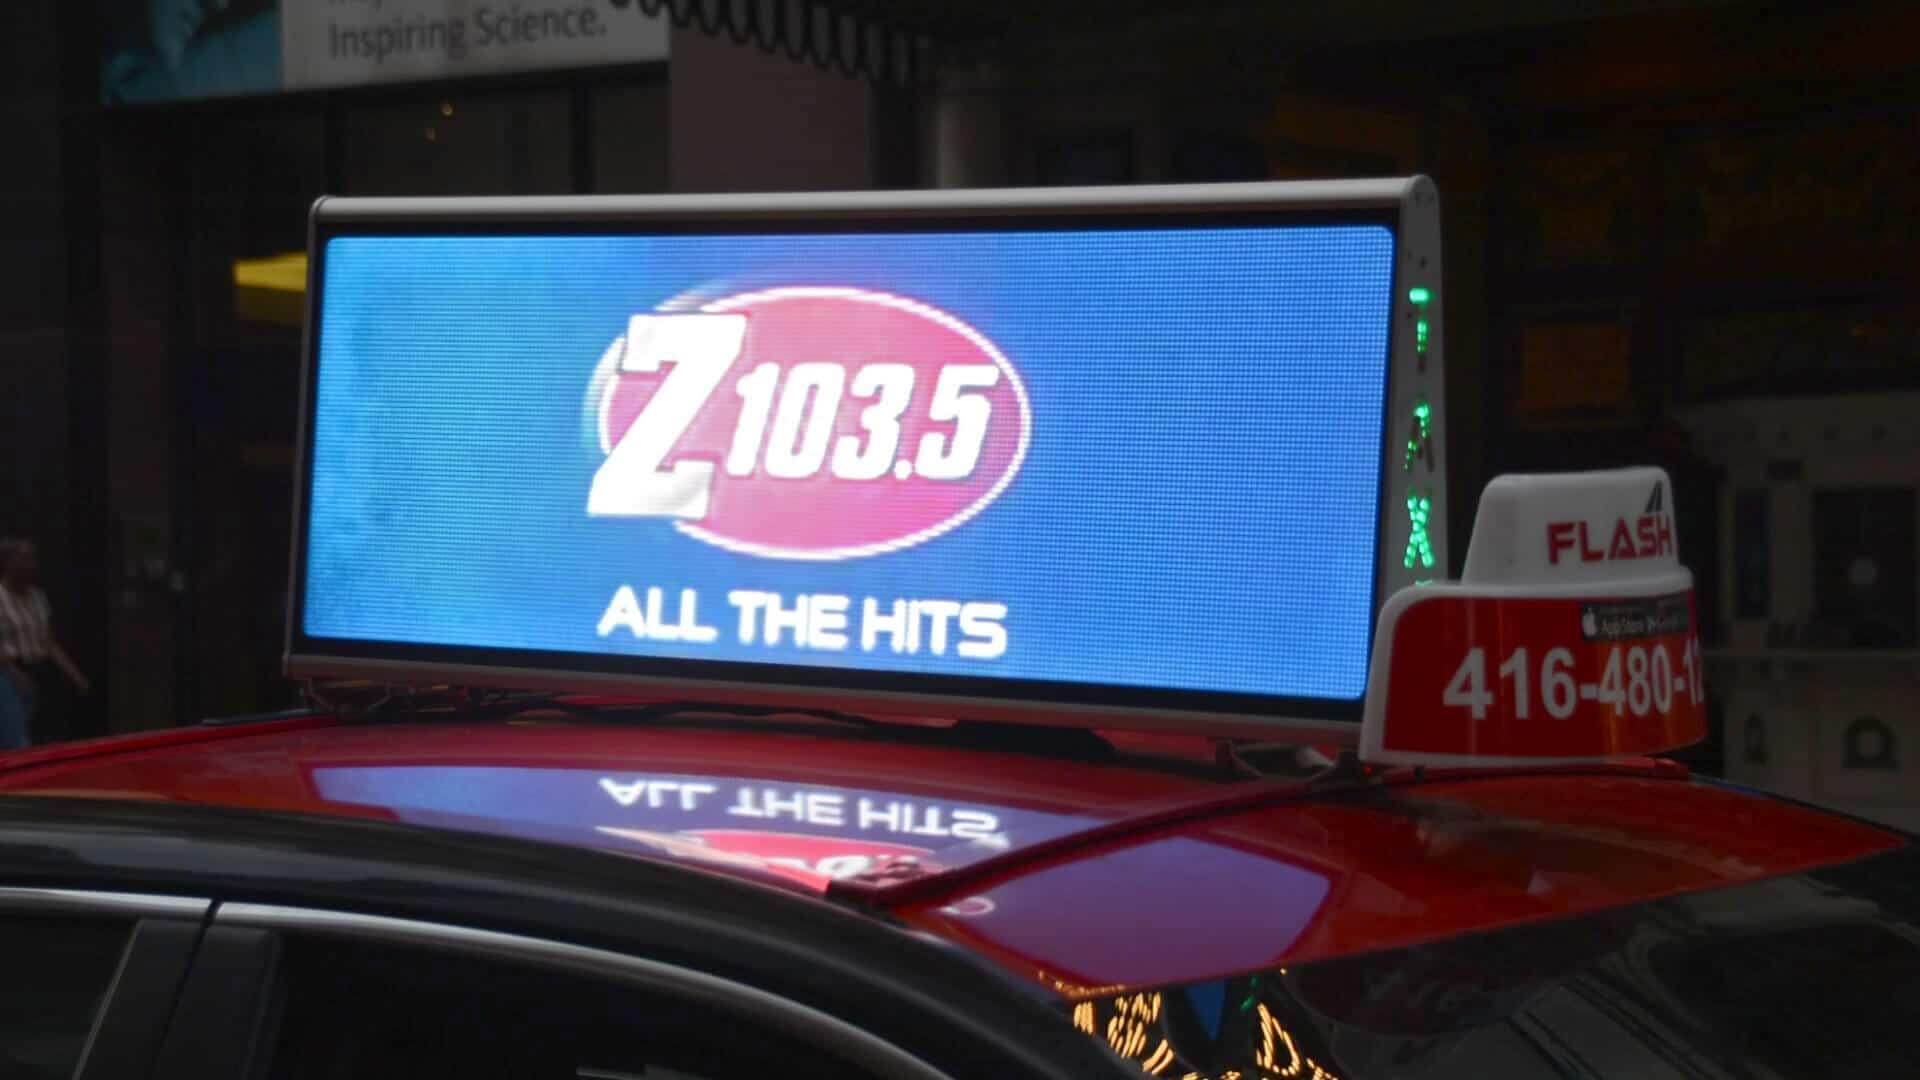 Local radio stations take advantage of taxi advertising